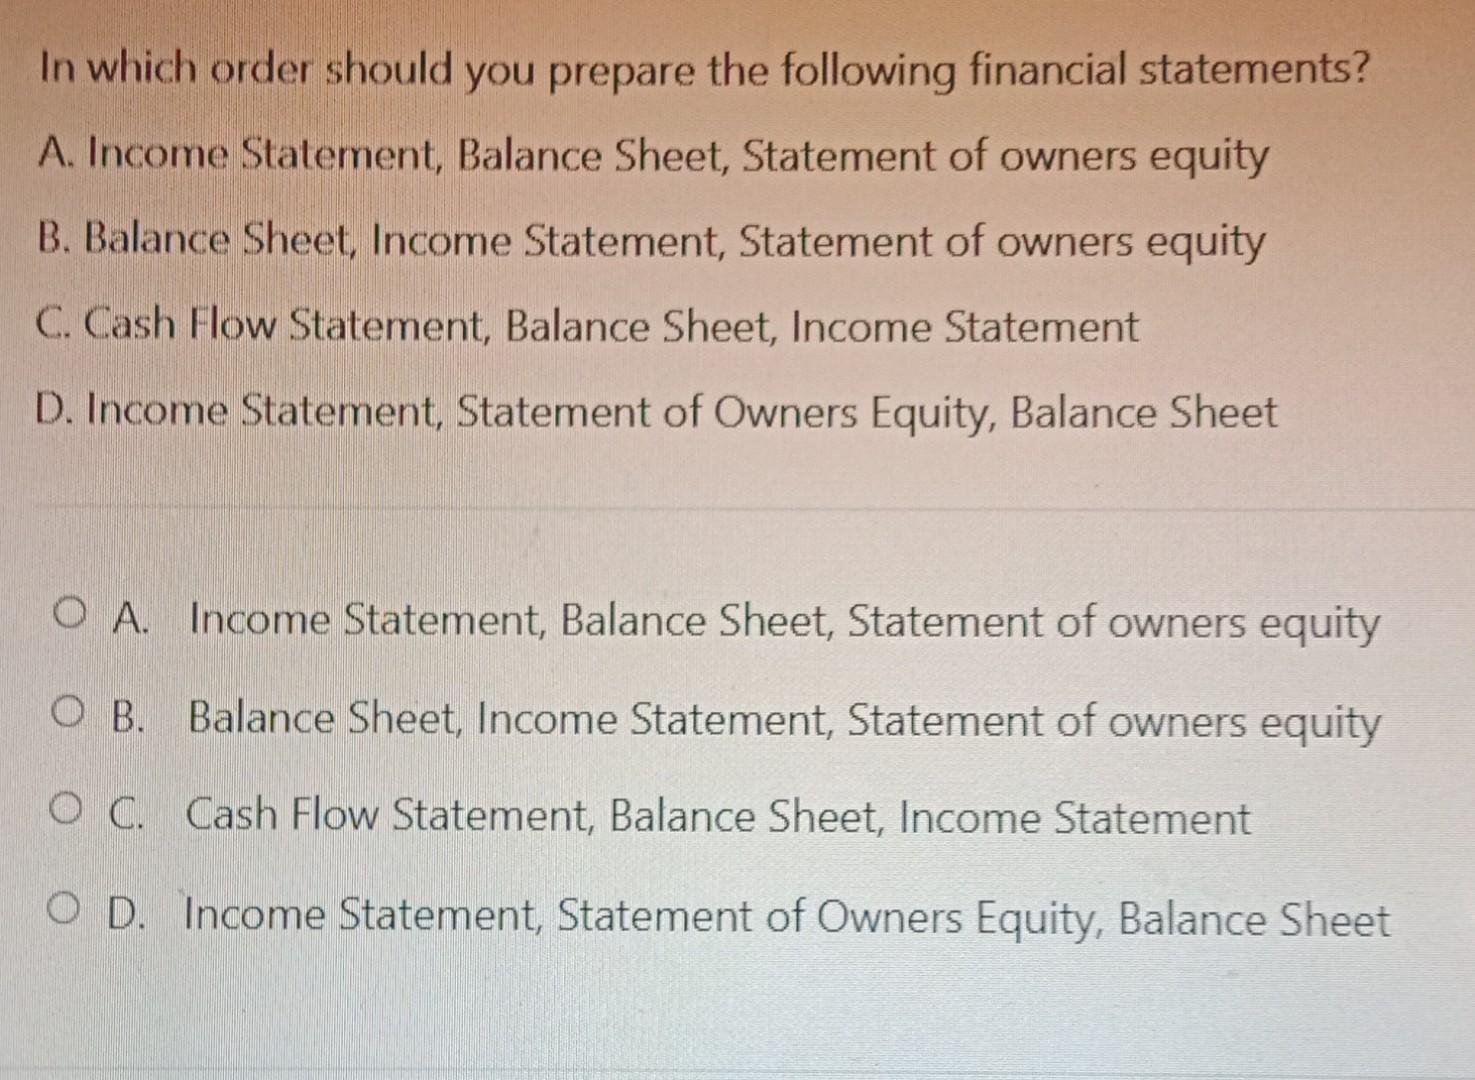 In which order should you prepare the following financial statements?A. Income Statement, Balance Sheet, Statement of owners